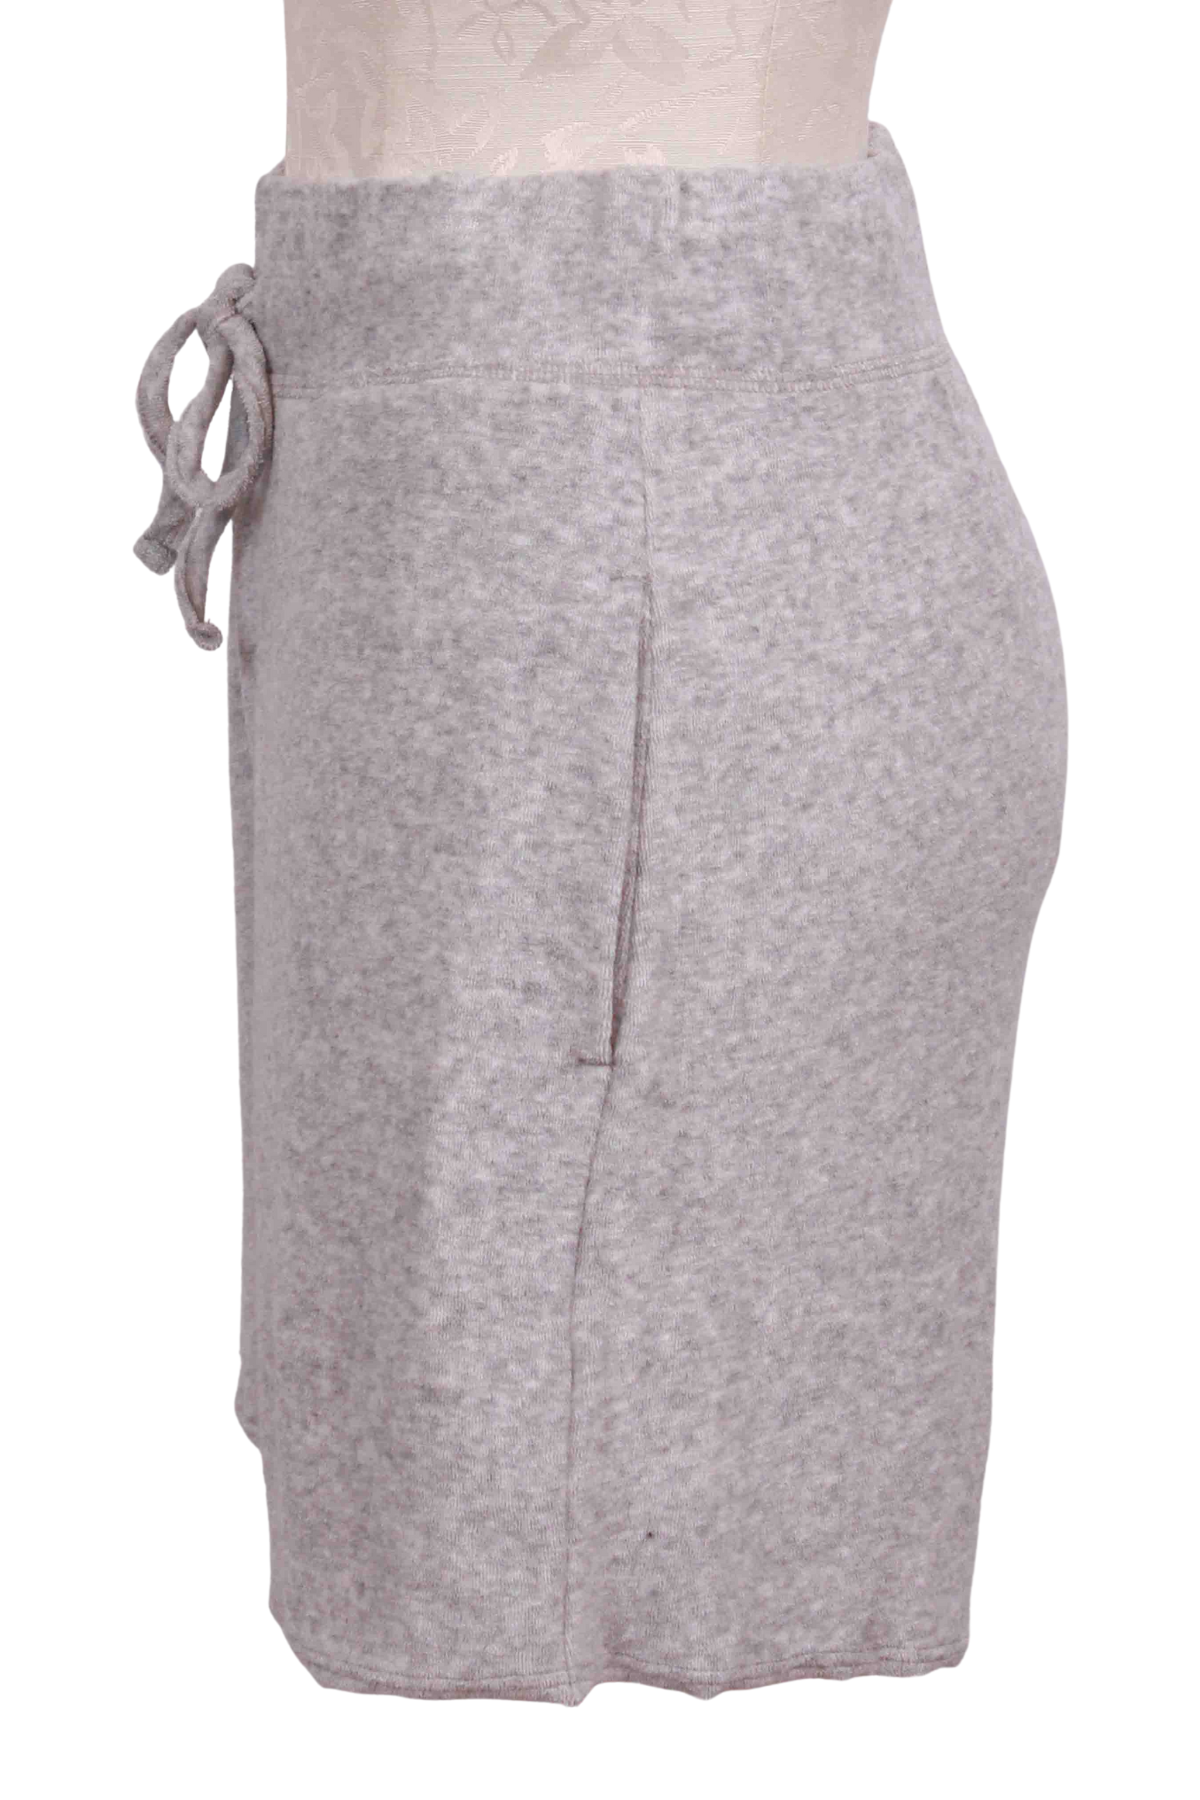 side view of Grey Heather Micro Terry Drawstring Short by Goldie Lewinter